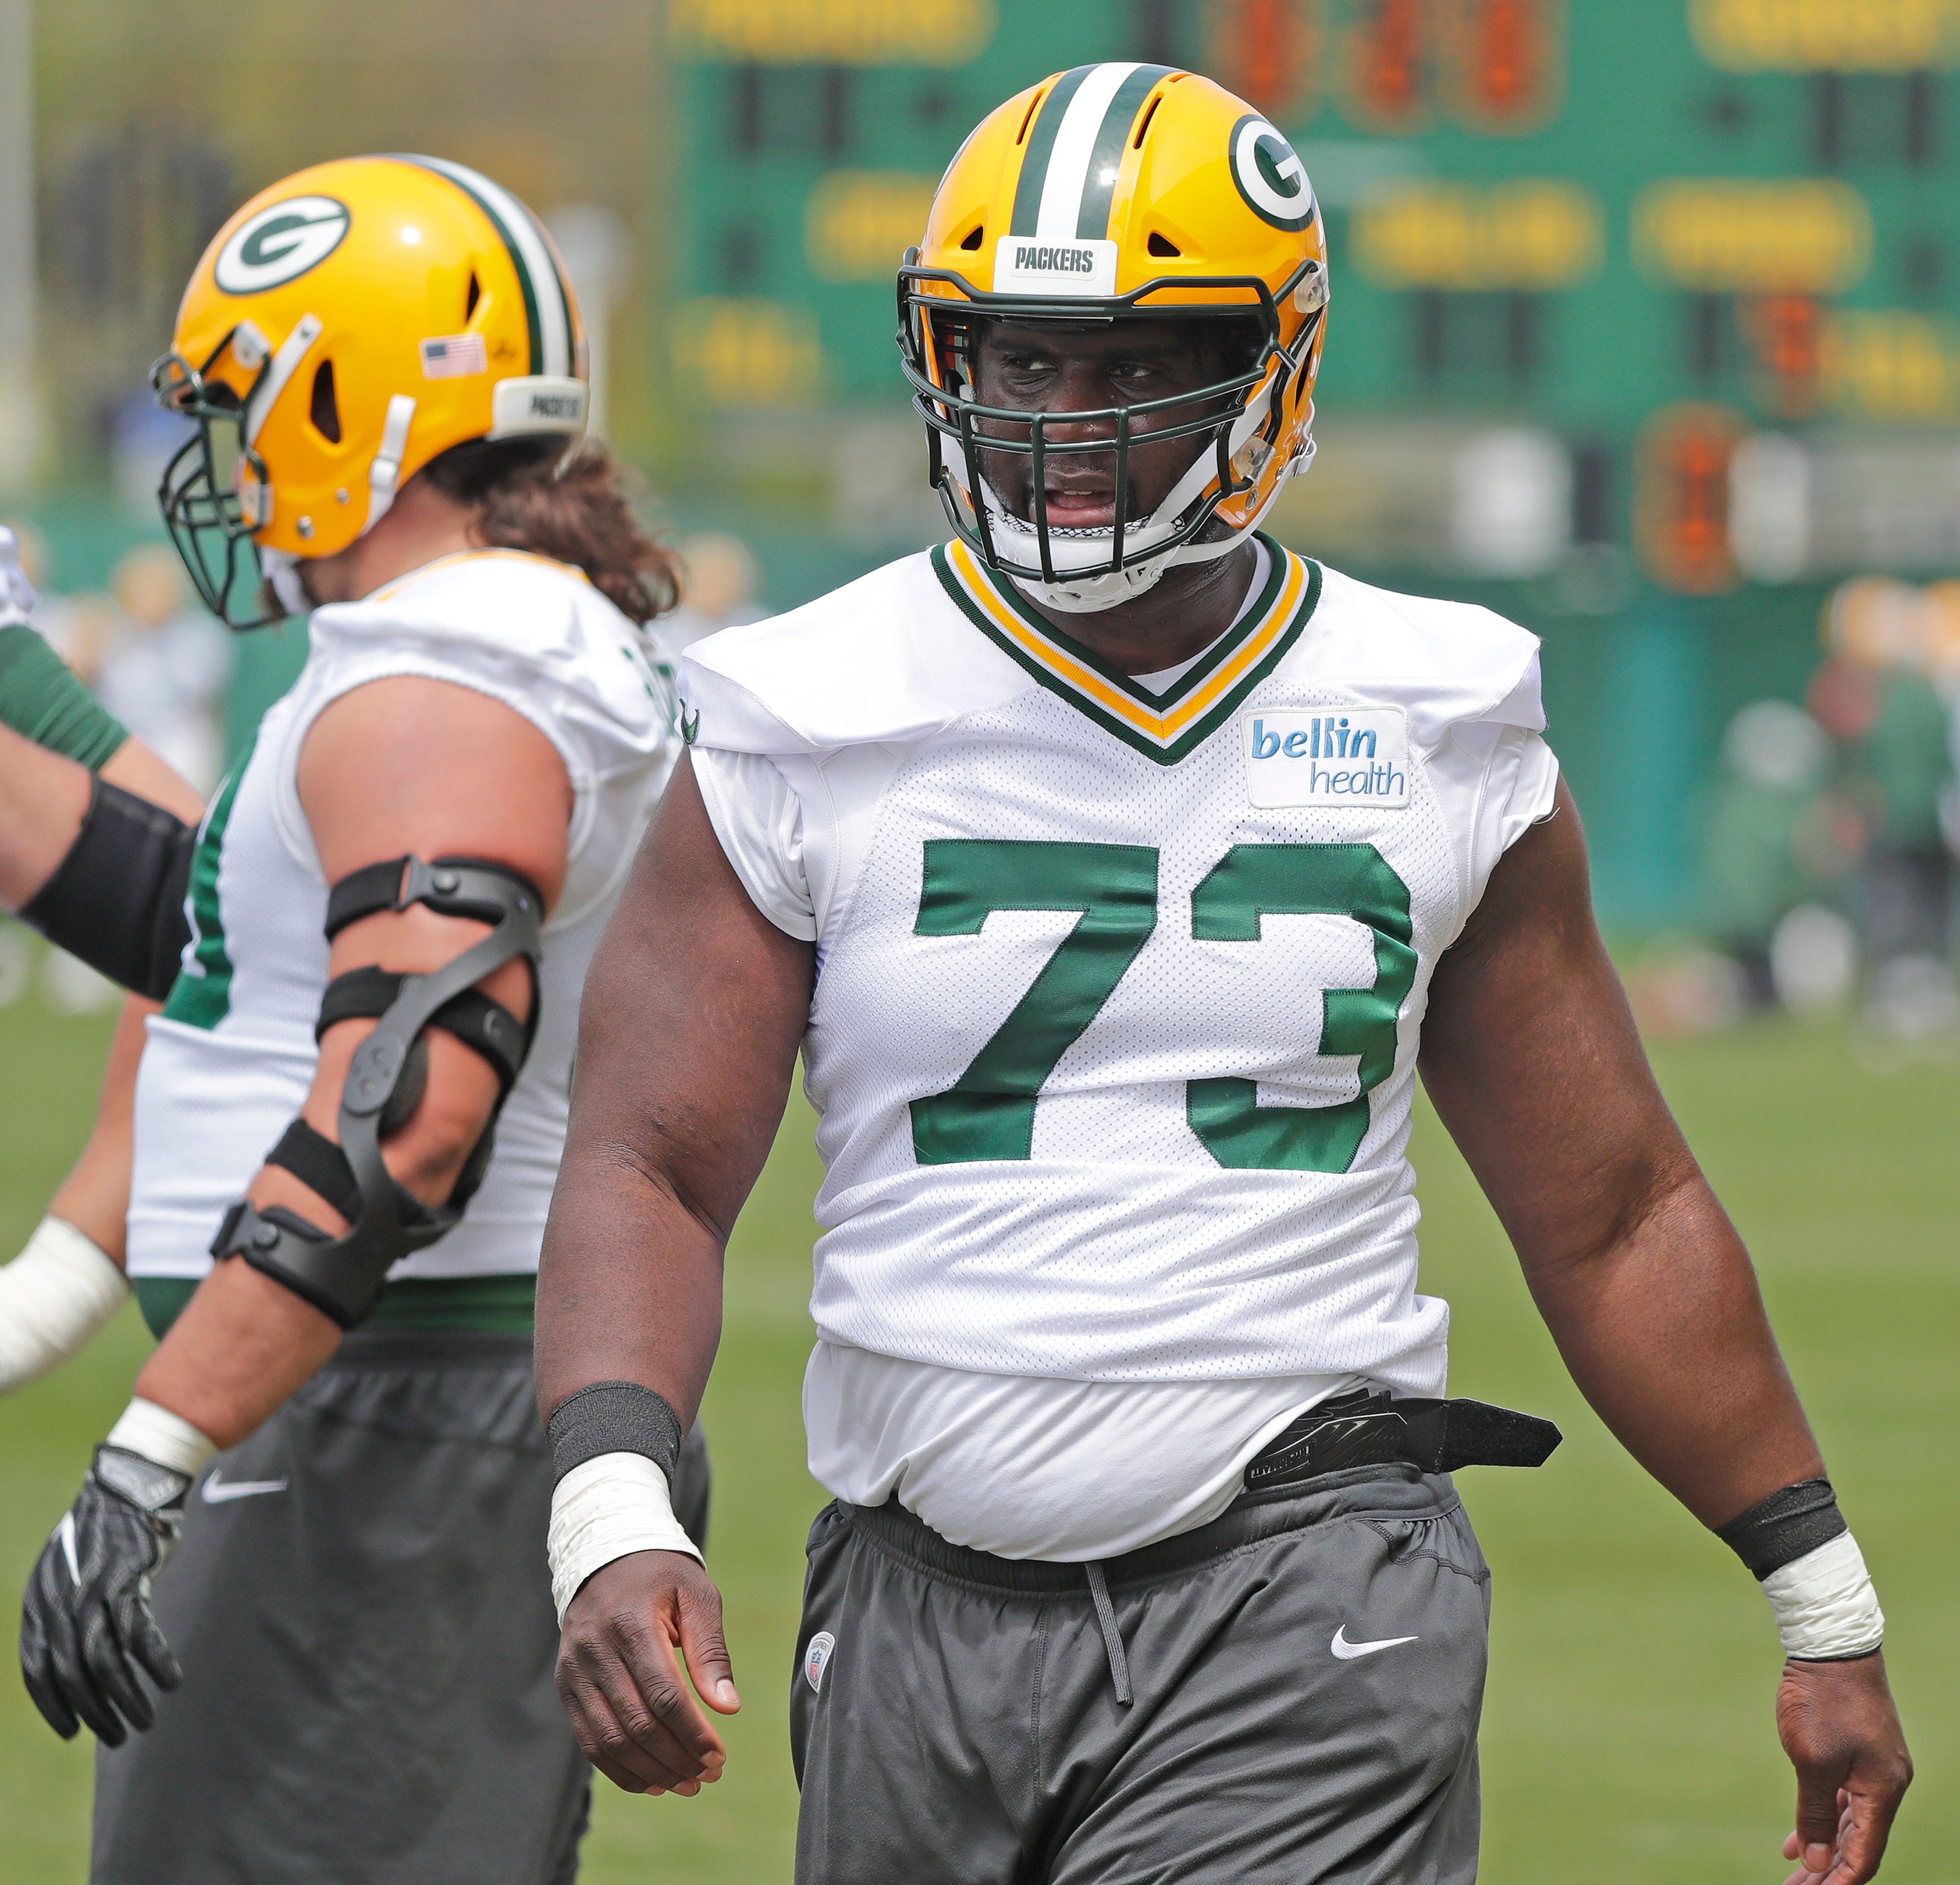 Green Bay Packers offensive lineman Yosh Nijman (73) during practice at Clarke Hinkle Field on Tuesday, May 21, 2019 in Ashwaubenon, Wis.
Adam Wesley/USA TODAY NETWORK-Wis